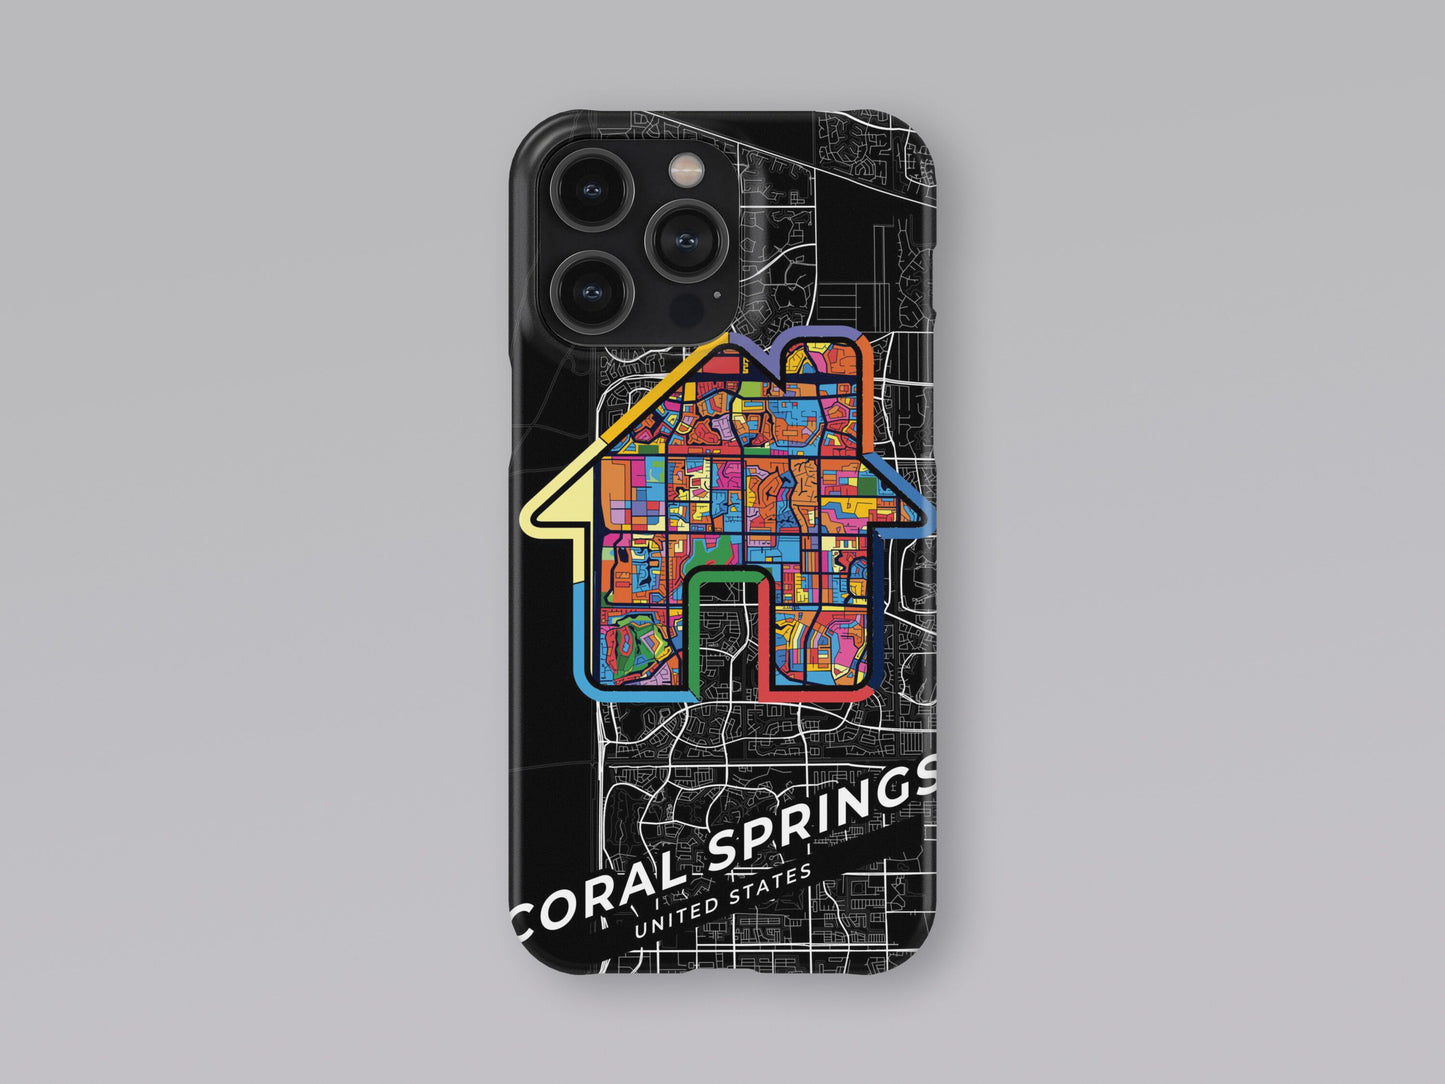 Coral Springs Florida slim phone case with colorful icon. Birthday, wedding or housewarming gift. Couple match cases. 3